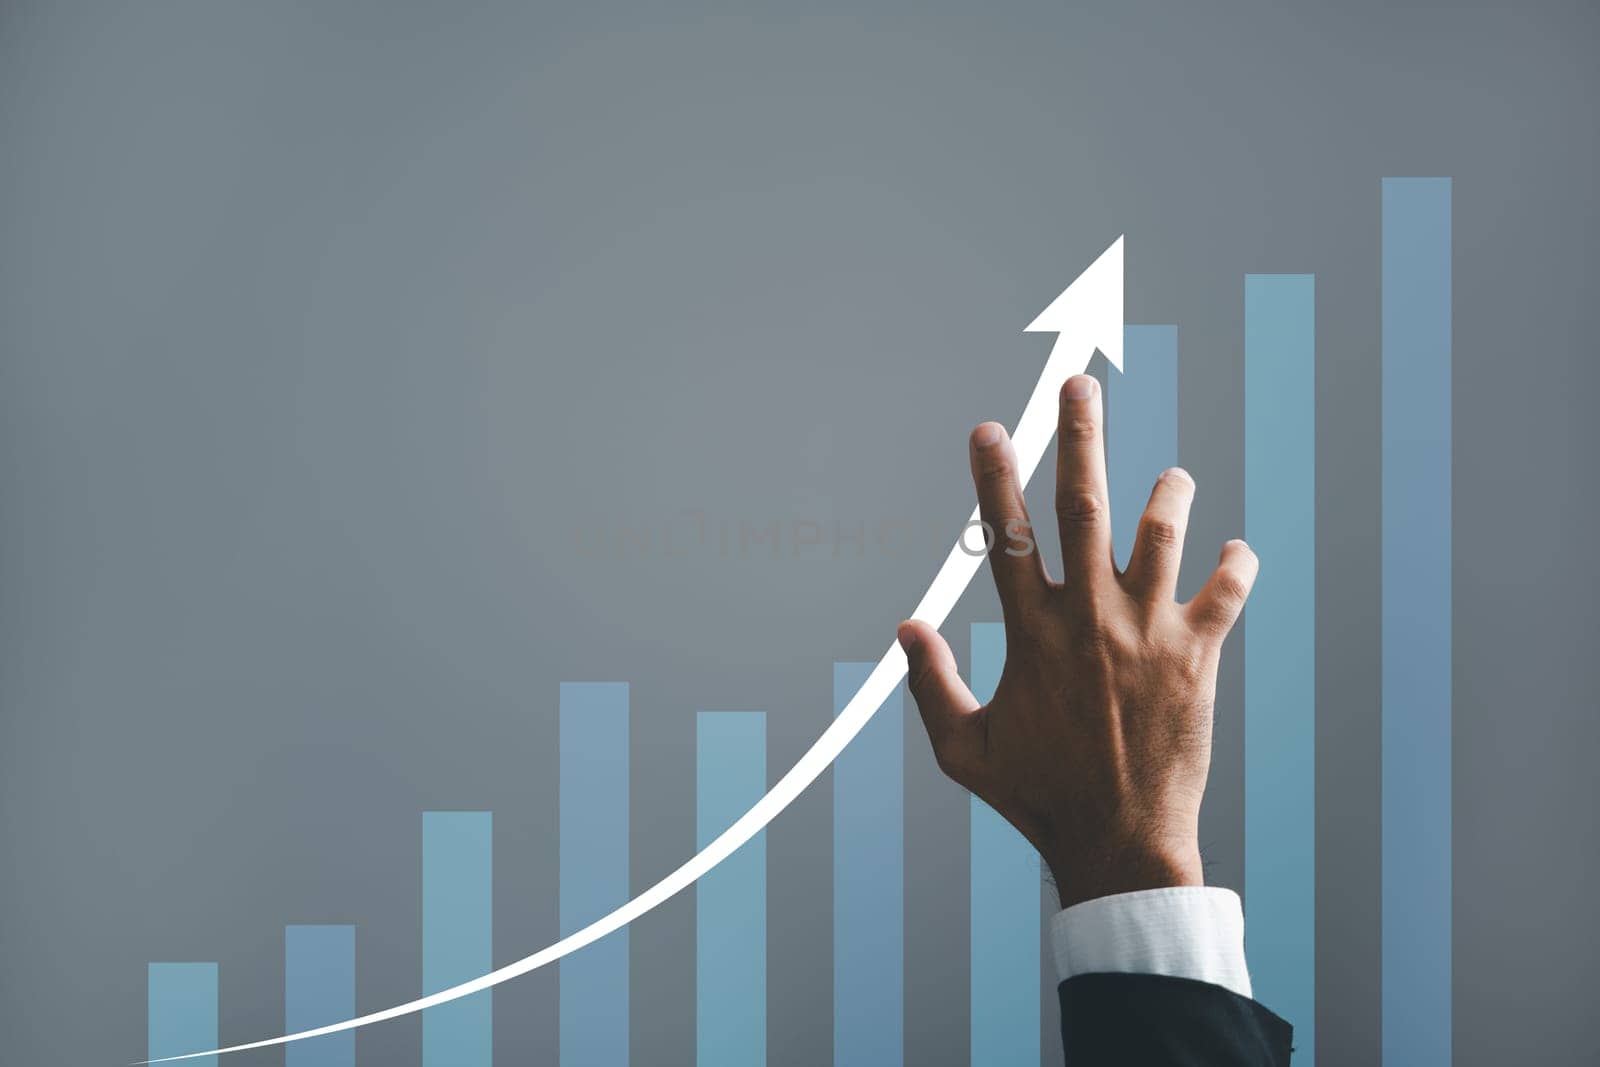 A businessman hand strategically points an arrow on a graph, symbolizing the corporate future growth plan. This captivating image illustrates the concept of business development, growth, and success.